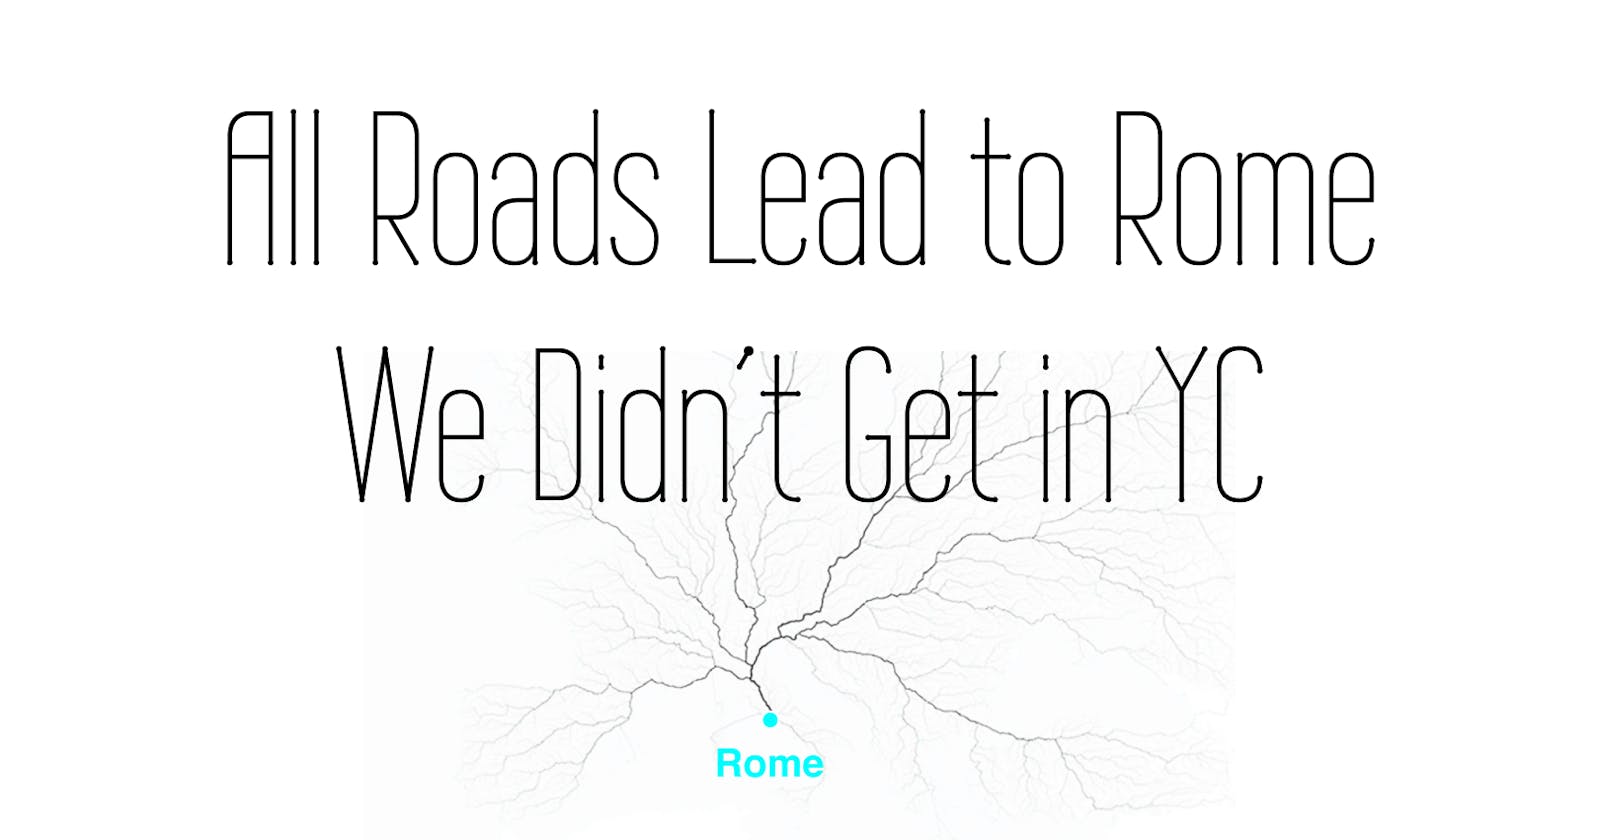 We Didn’t Get in YC But All Roads Lead to Rome